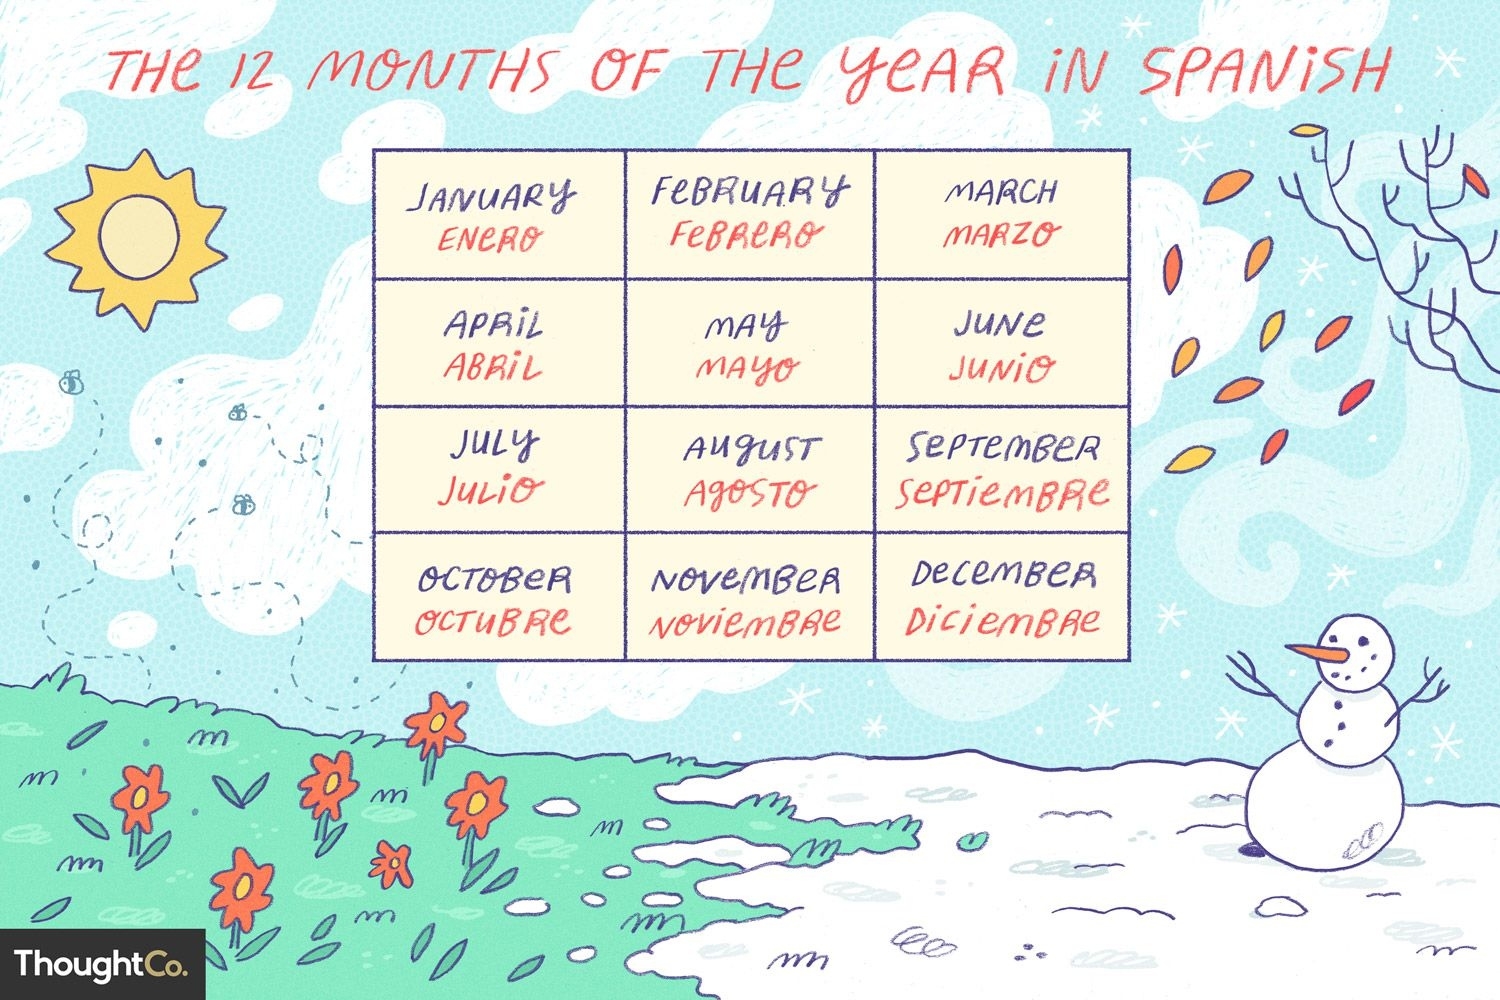 Months Of The Year In Spanish 3 Calendar Months Meaning